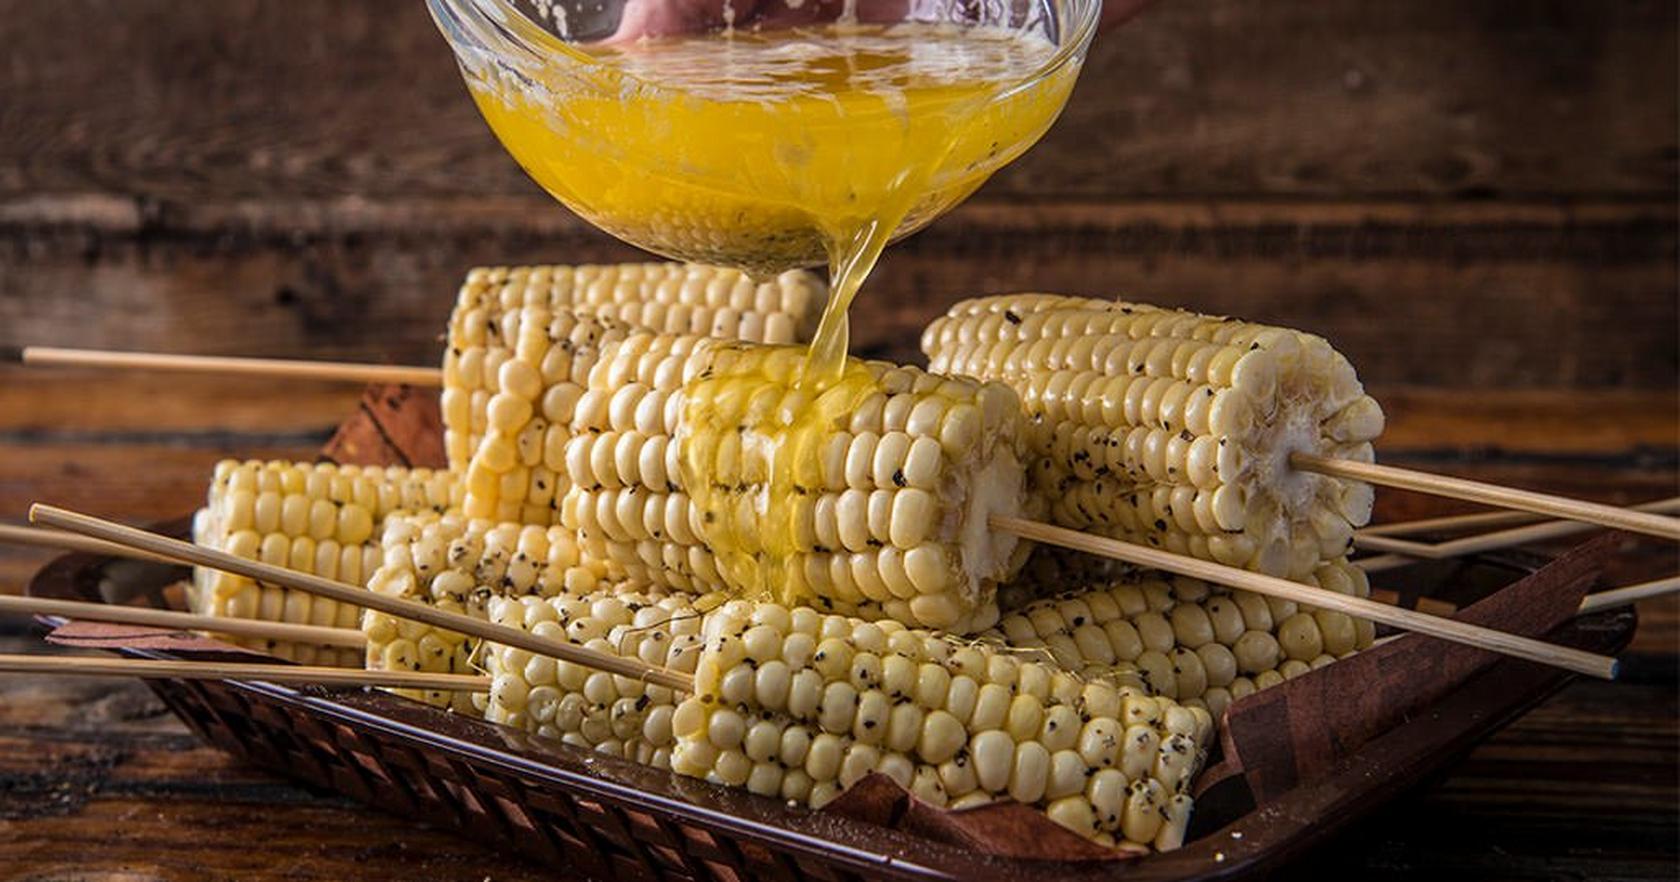 image of Grilled Corn On The Cob